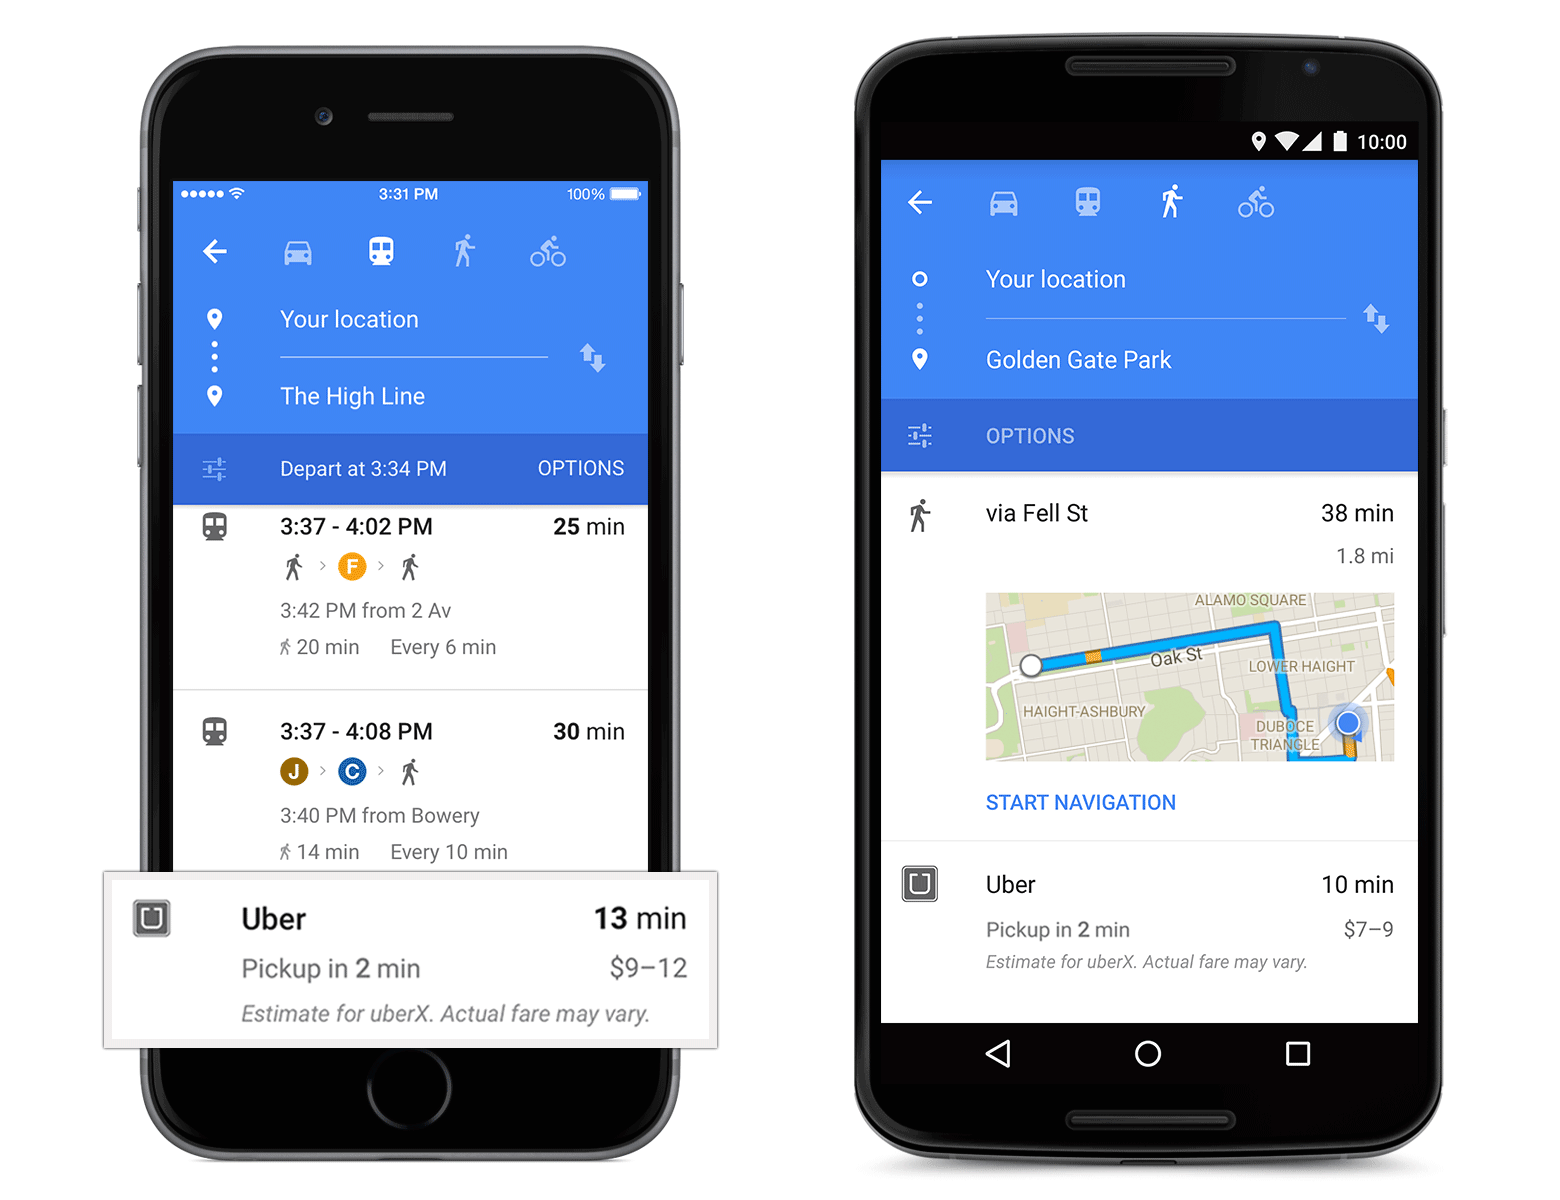 Google Maps Gets a Fresh New Material Design on Mobile1560 x 1200